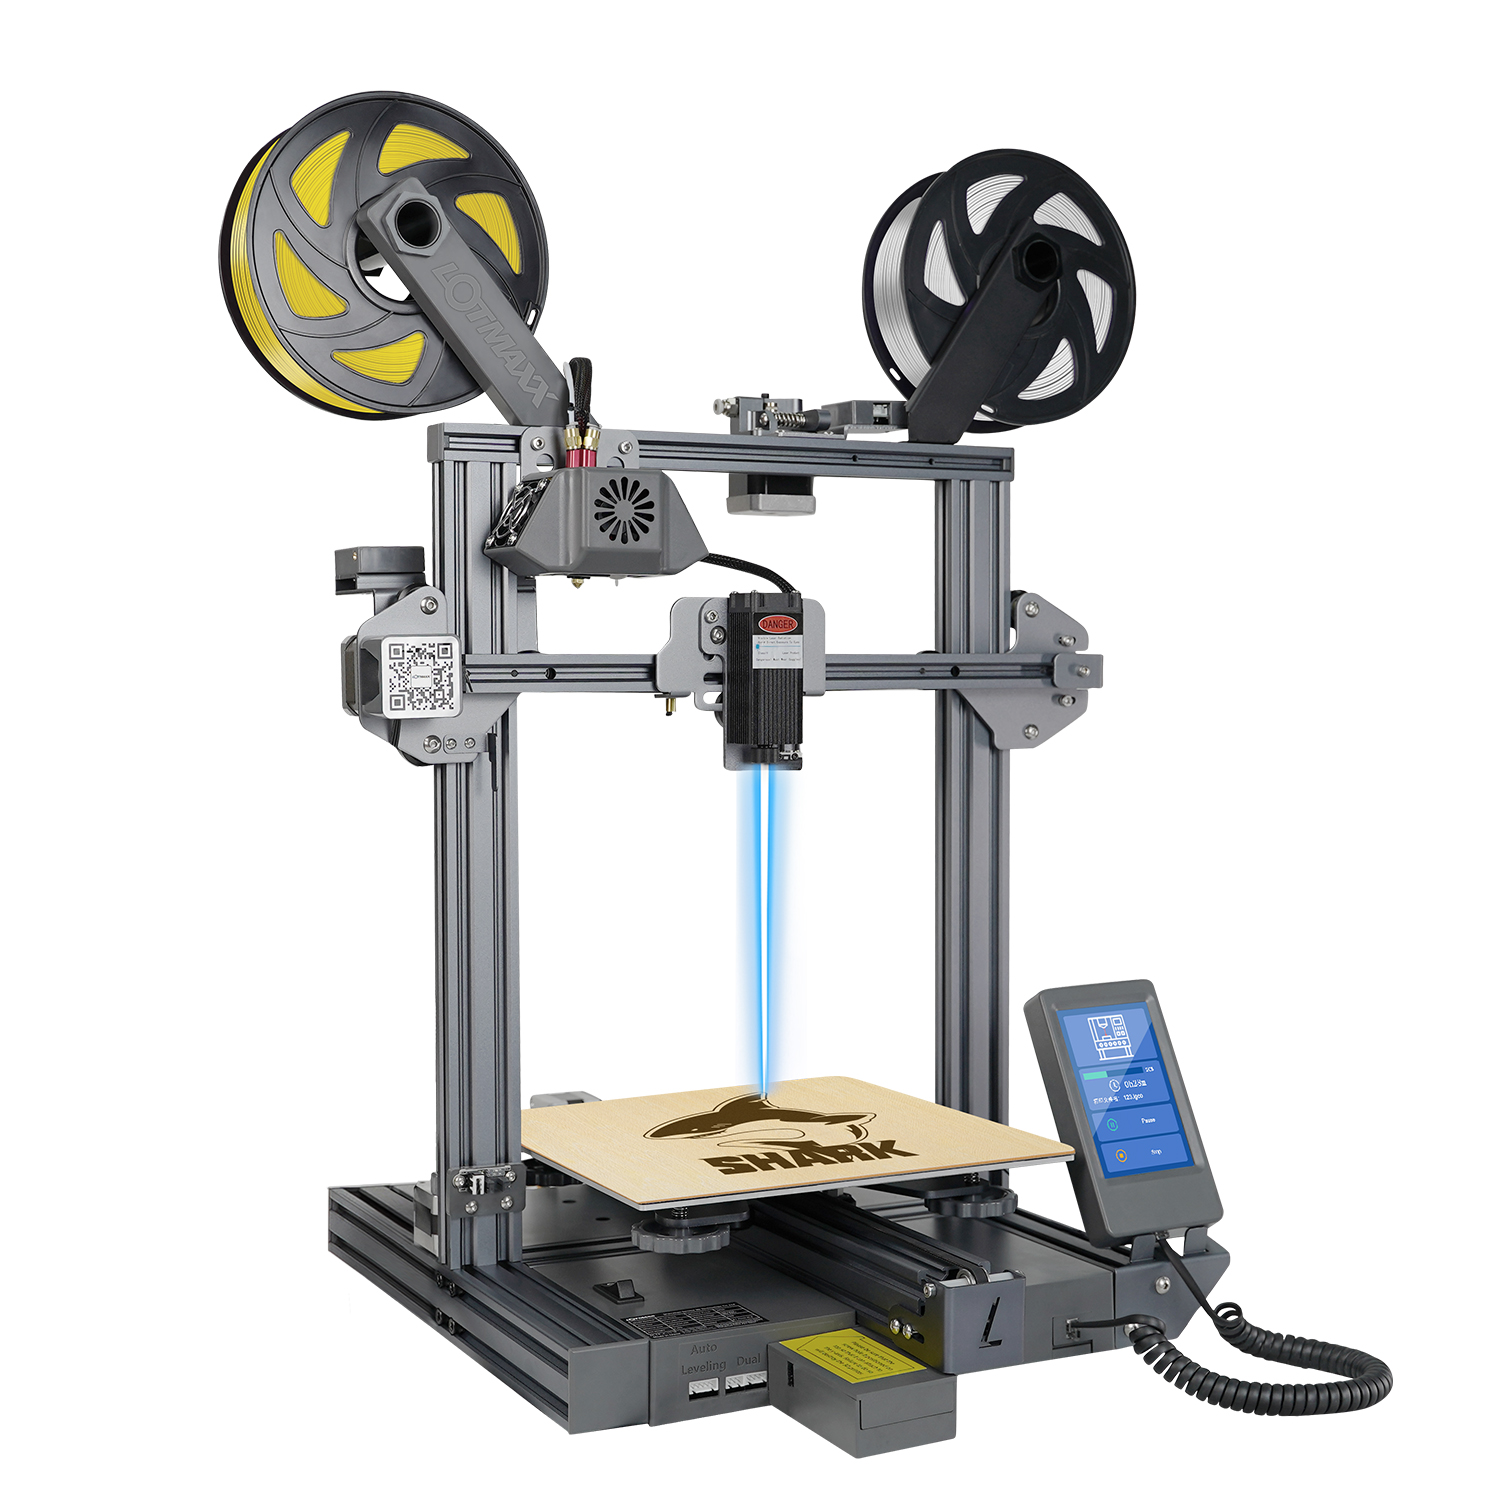 Find LOTMAXX SC 10 SHARK V2 3 in 1 3D Printer with Auto Levelling for Sale on Gipsybee.com with cryptocurrencies